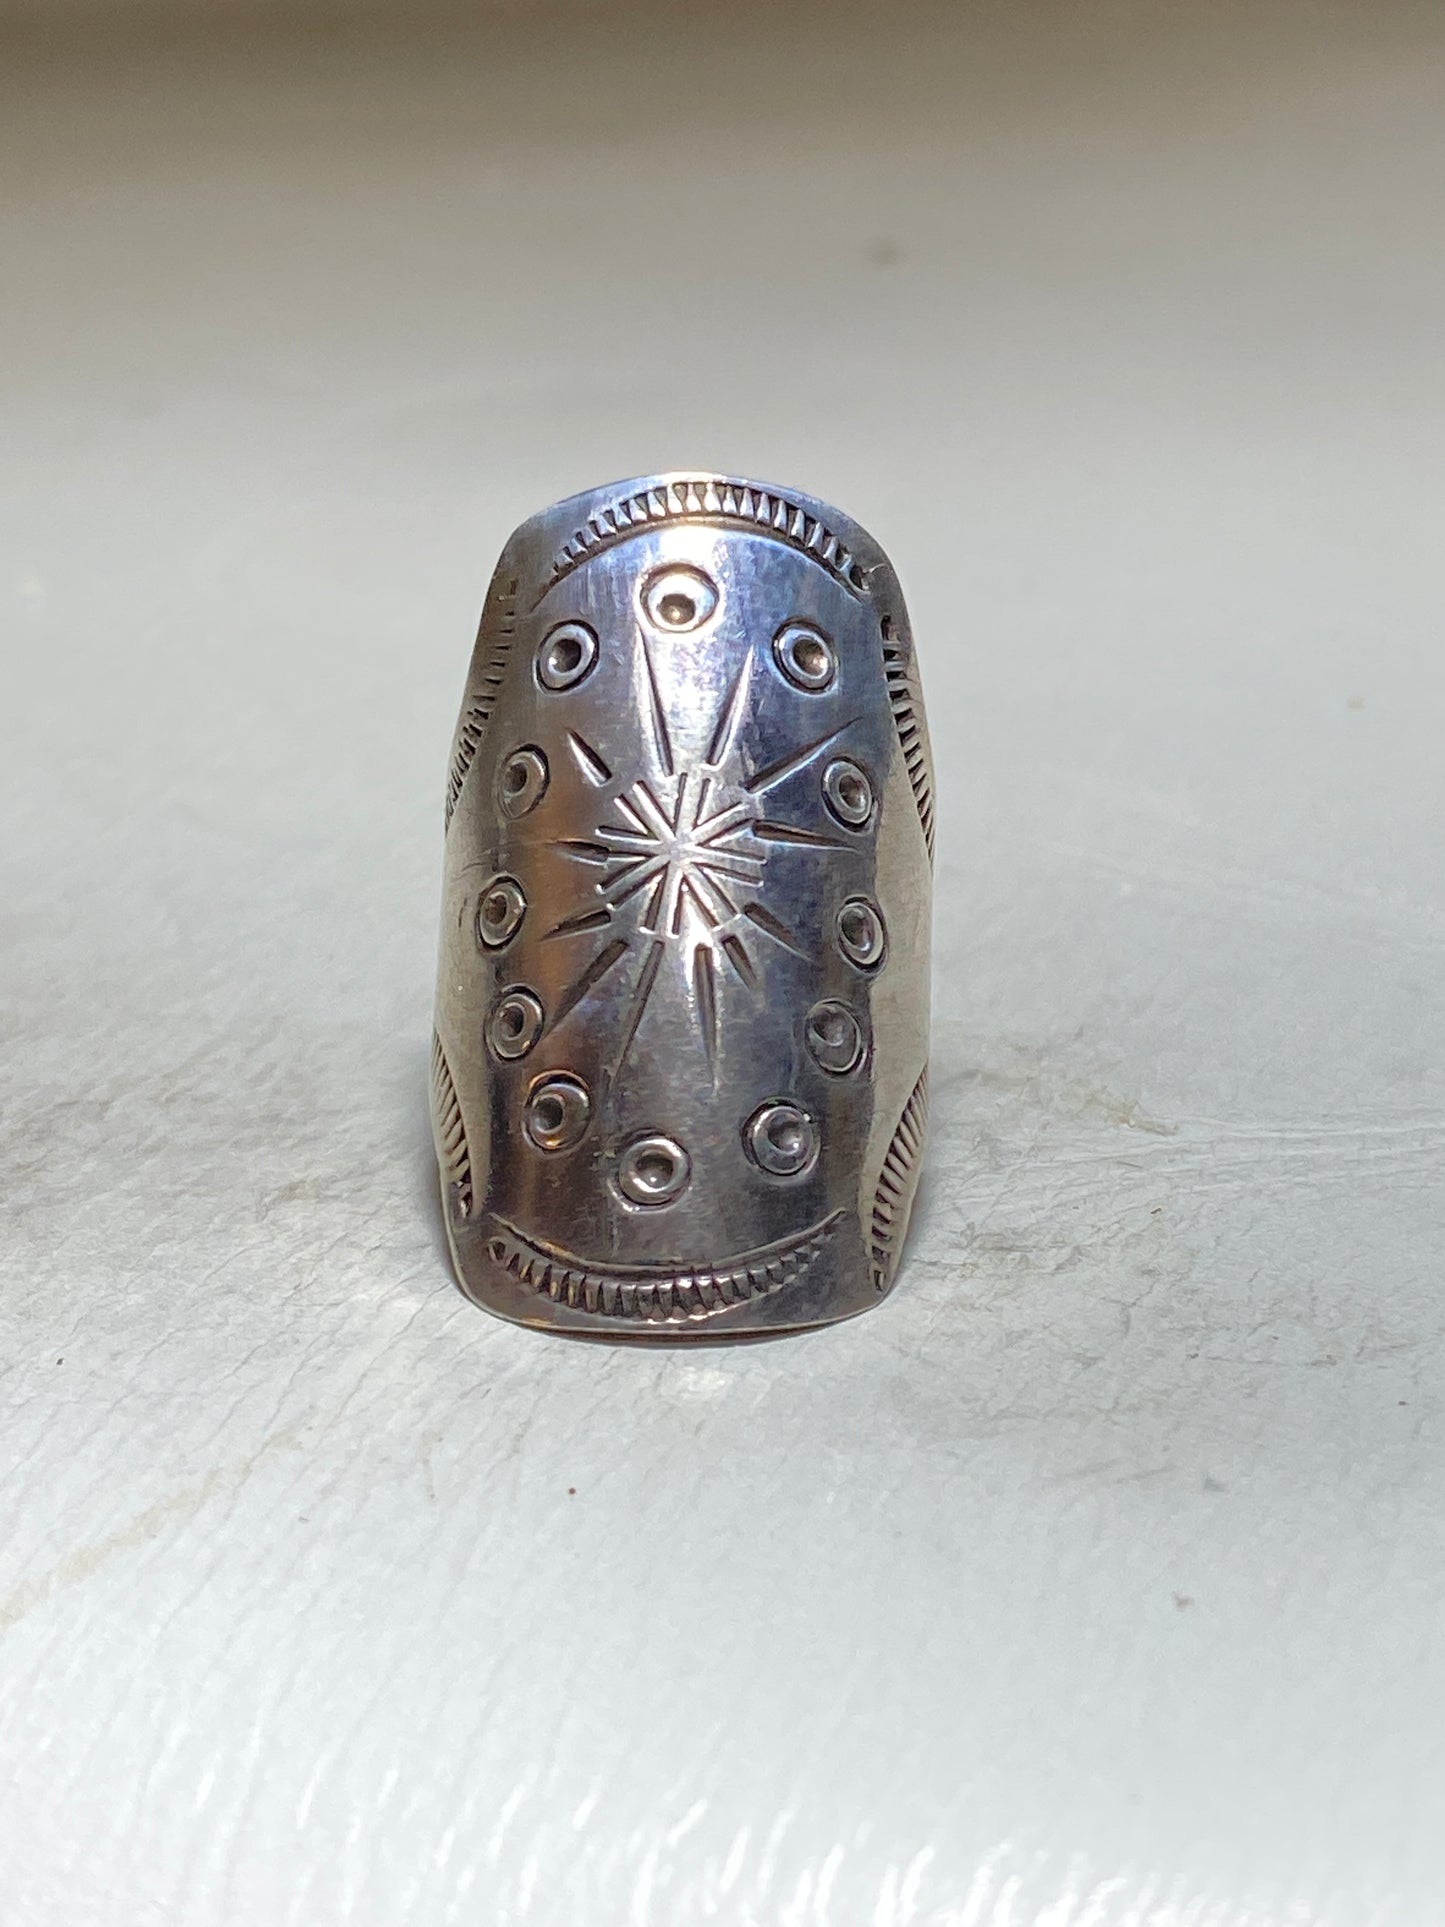 Cigar band ring star southwest knuckle band women sterling silver